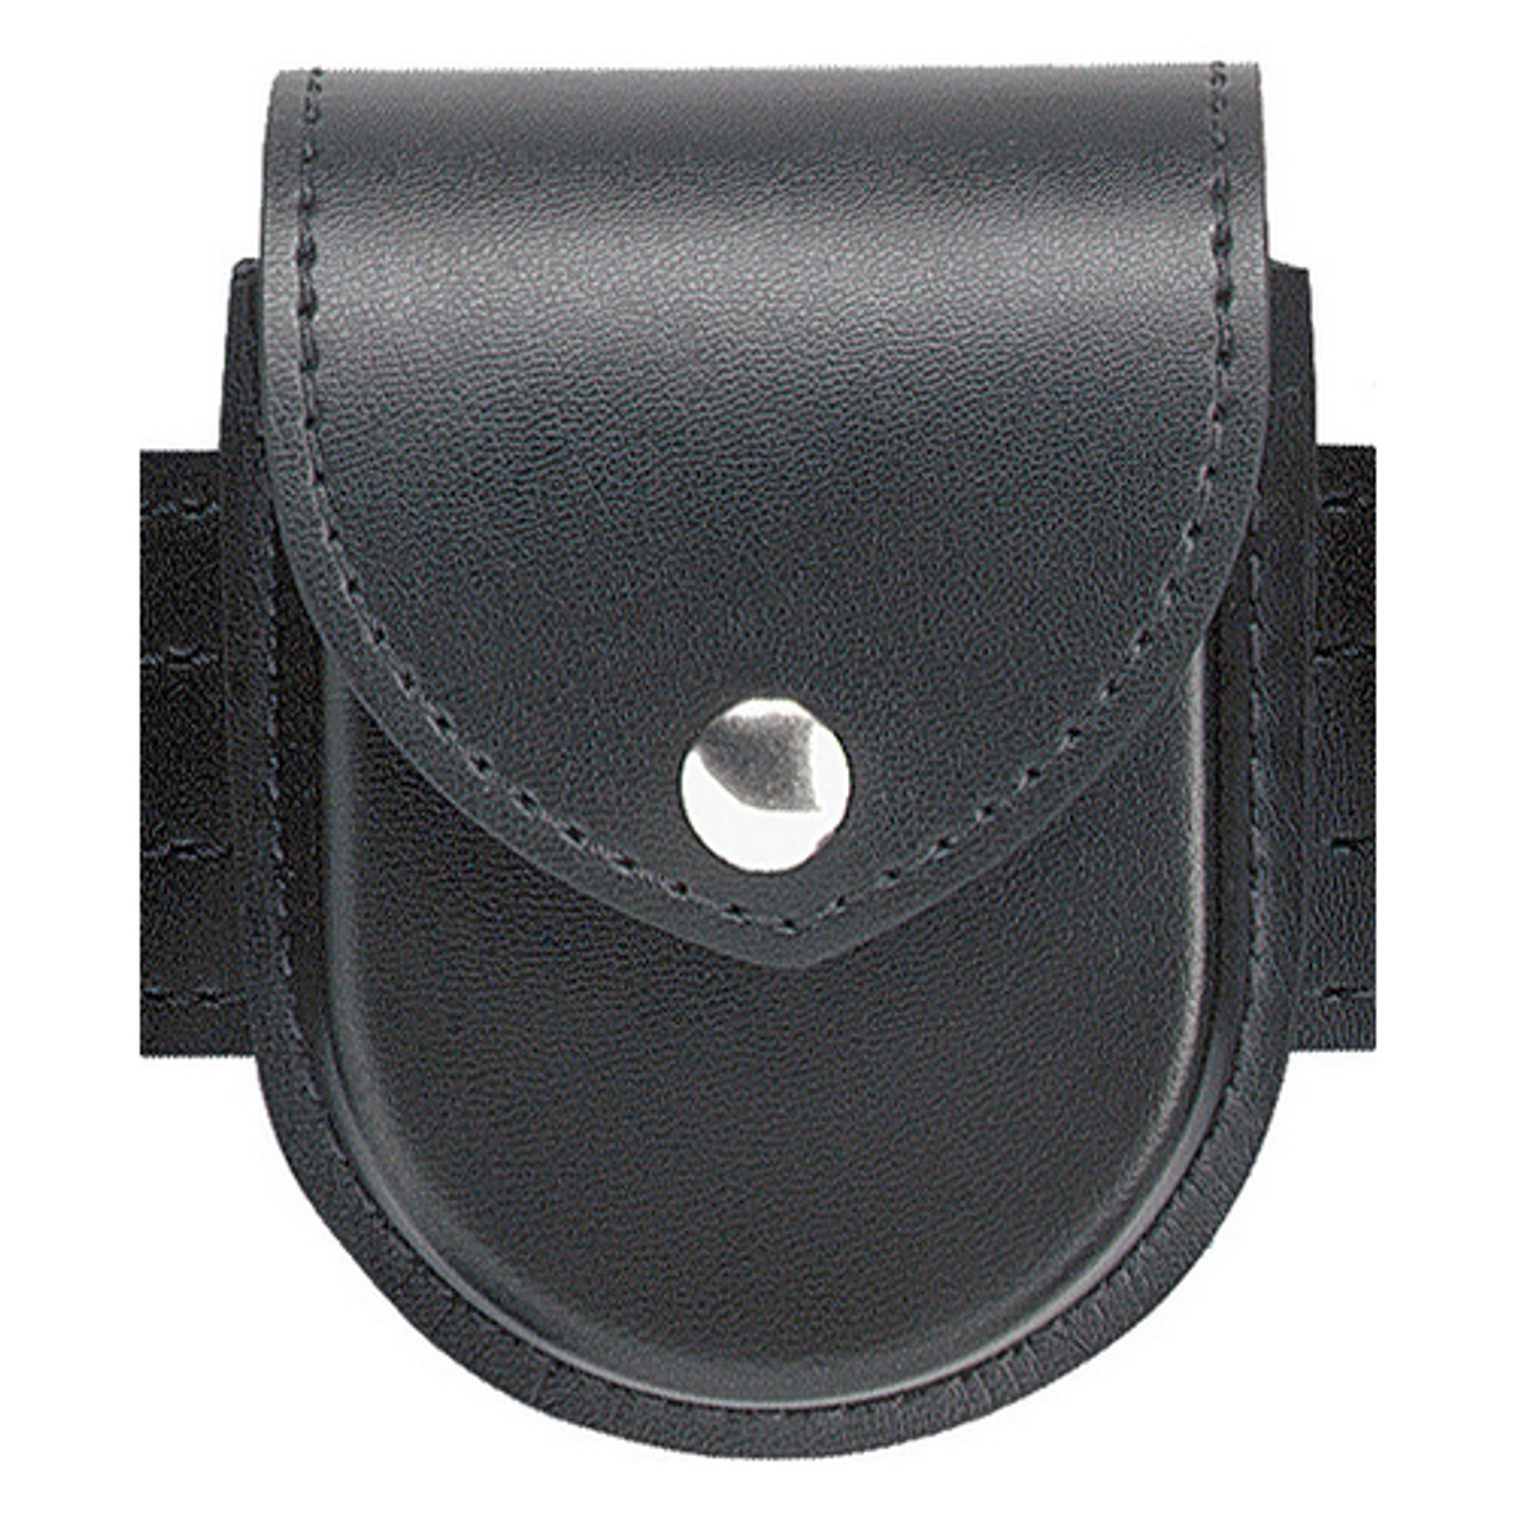 Model 290 Double Handcuff Pouch - 90-4HS